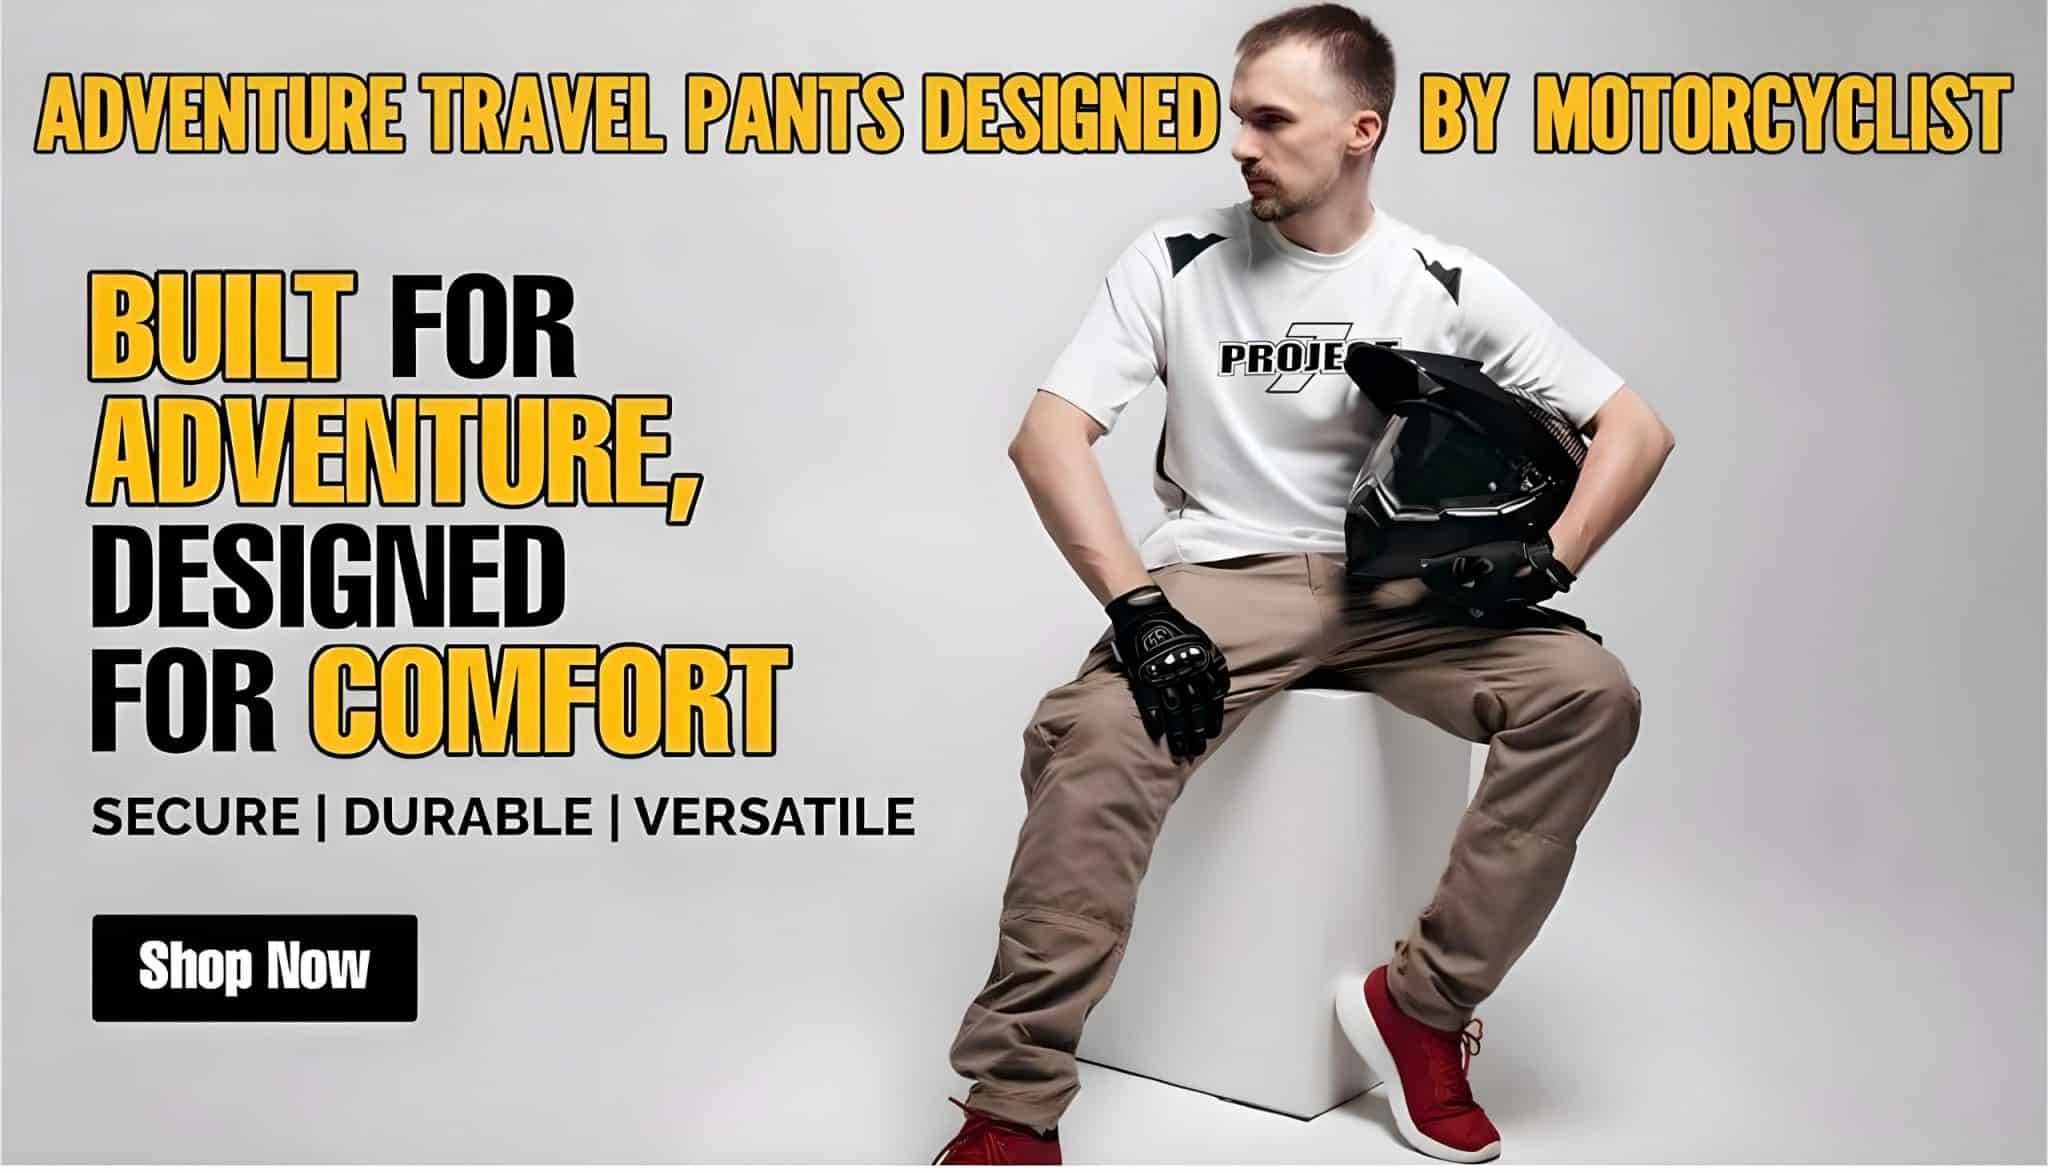 The Project 7's Pro Travel Pants - Anti Pickpocket, Hiking, Quick-Dry, Lightweight, Climbing, Outdoor Cargo, Water-Resistant, Tactical Travel Pants